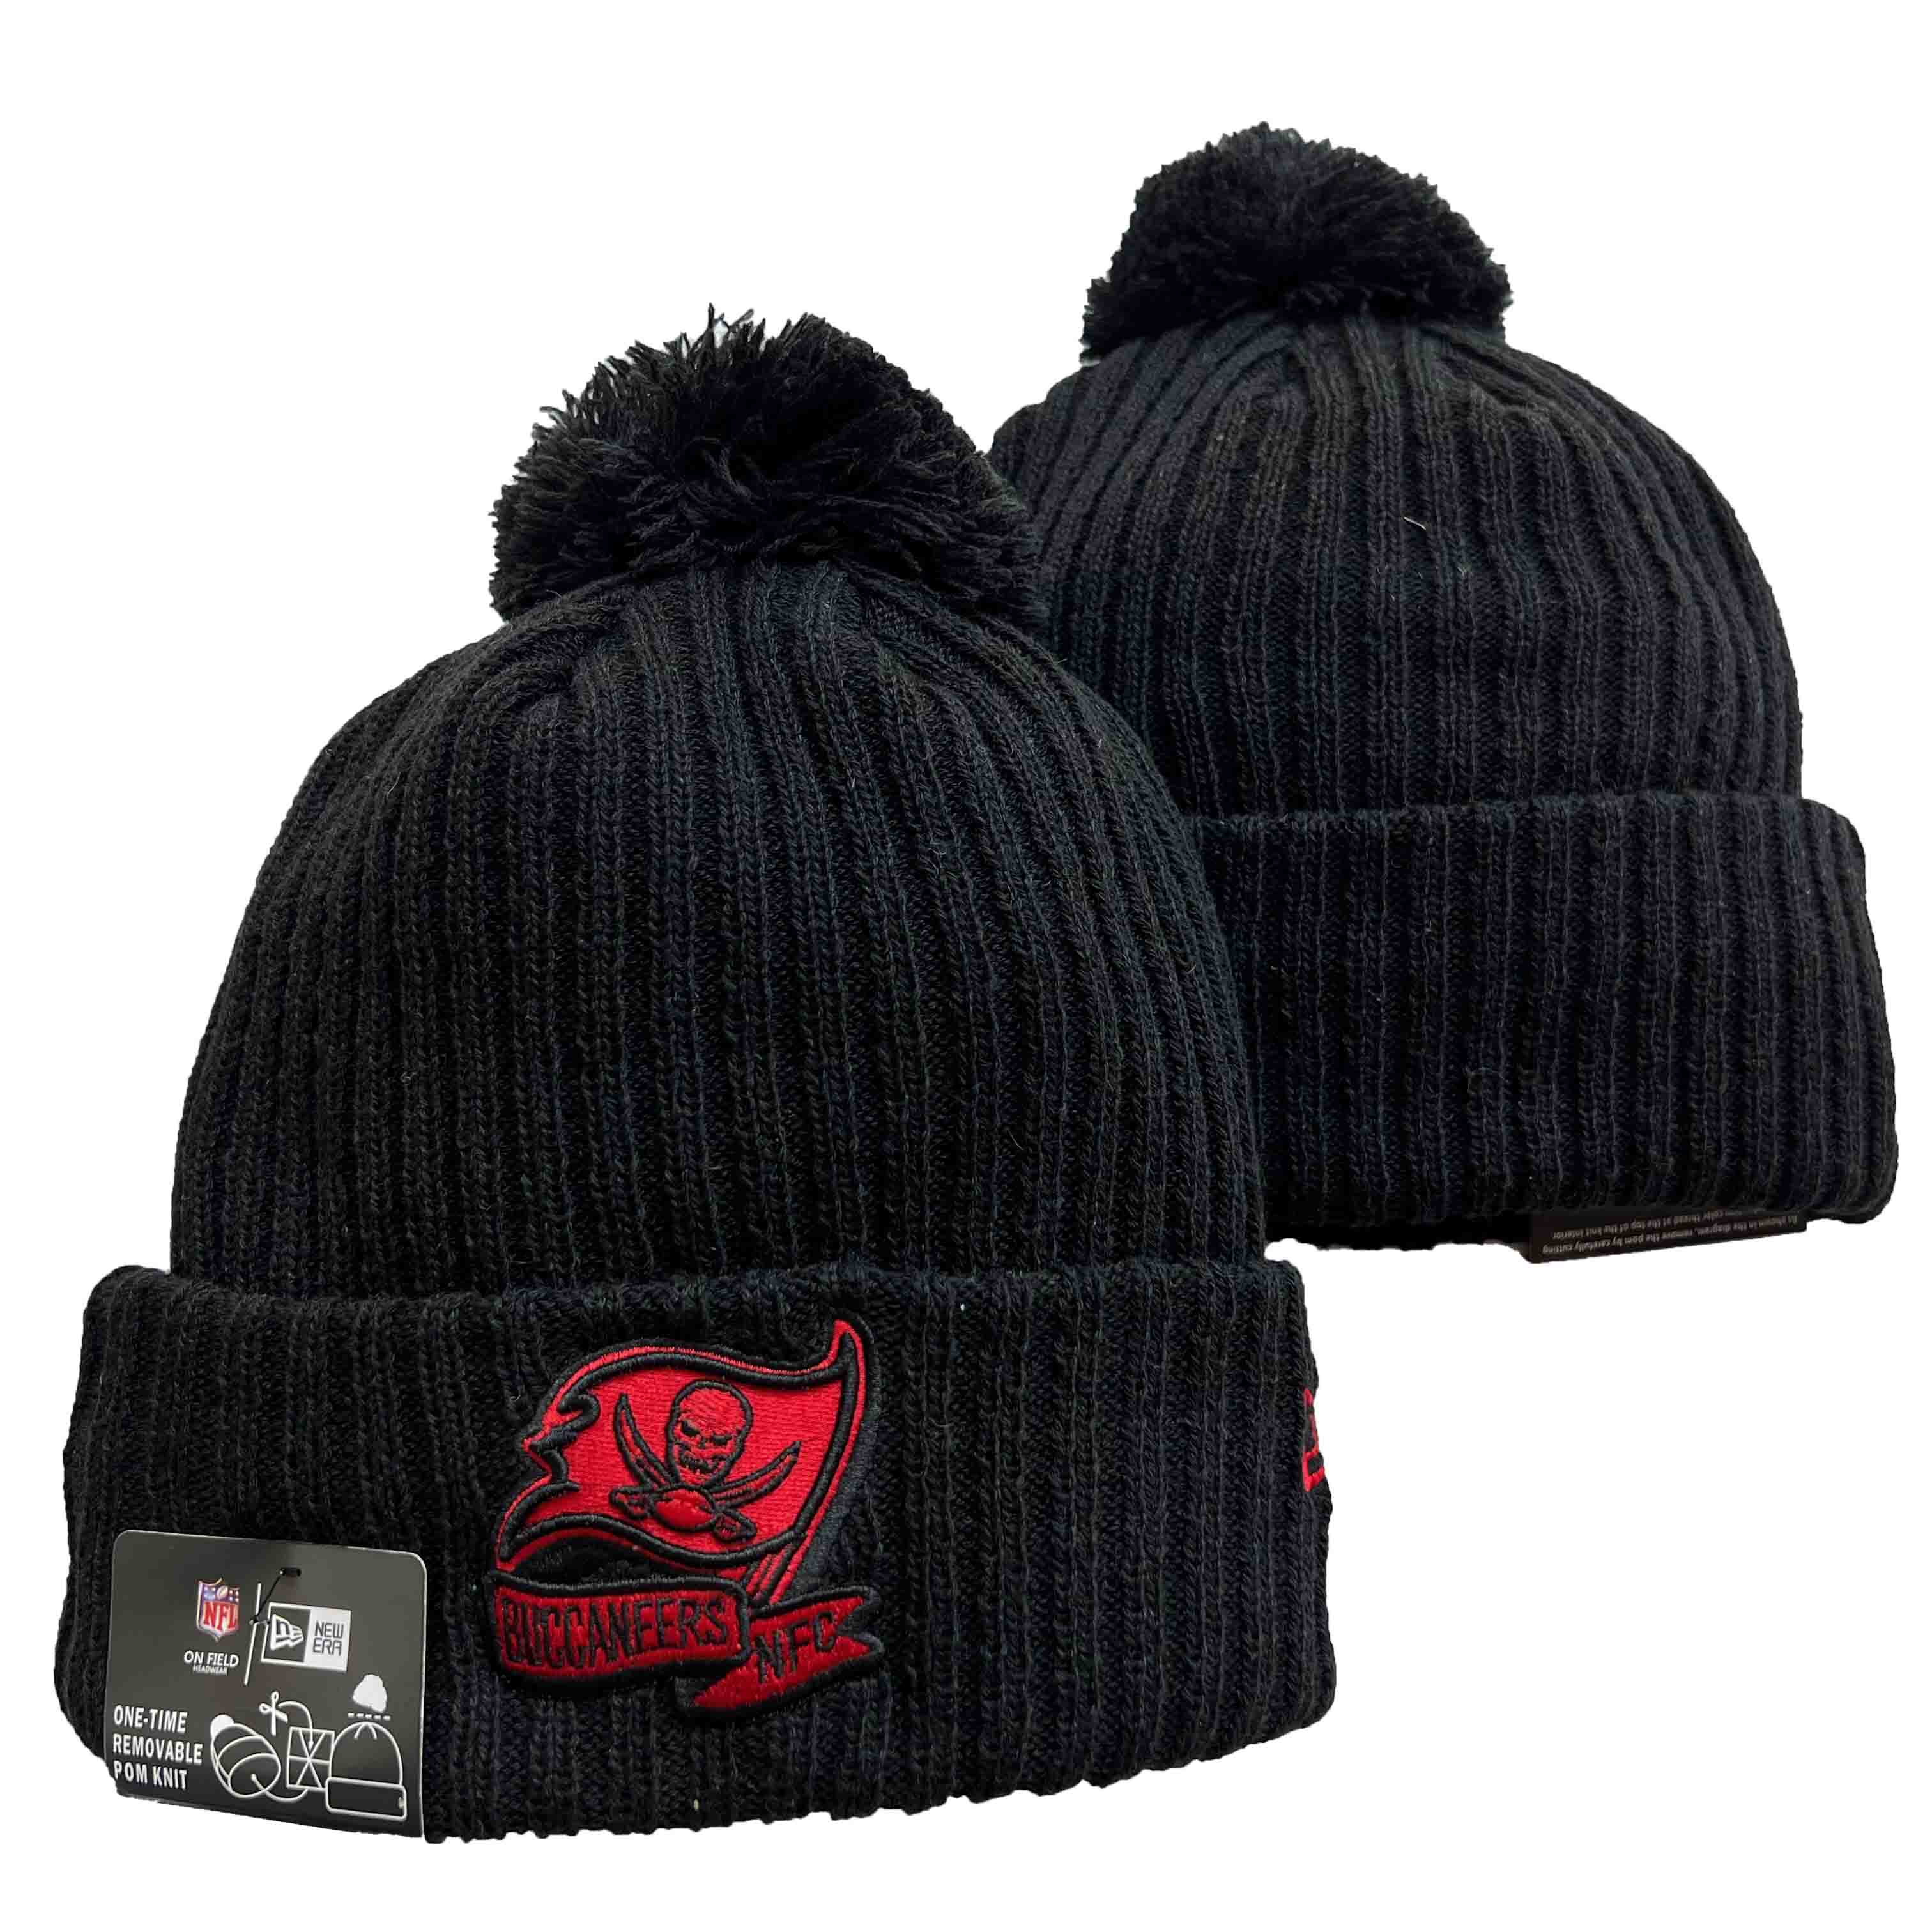 NFL Tampa Bay Buccaneers Beanies Knit Hats-YD1281